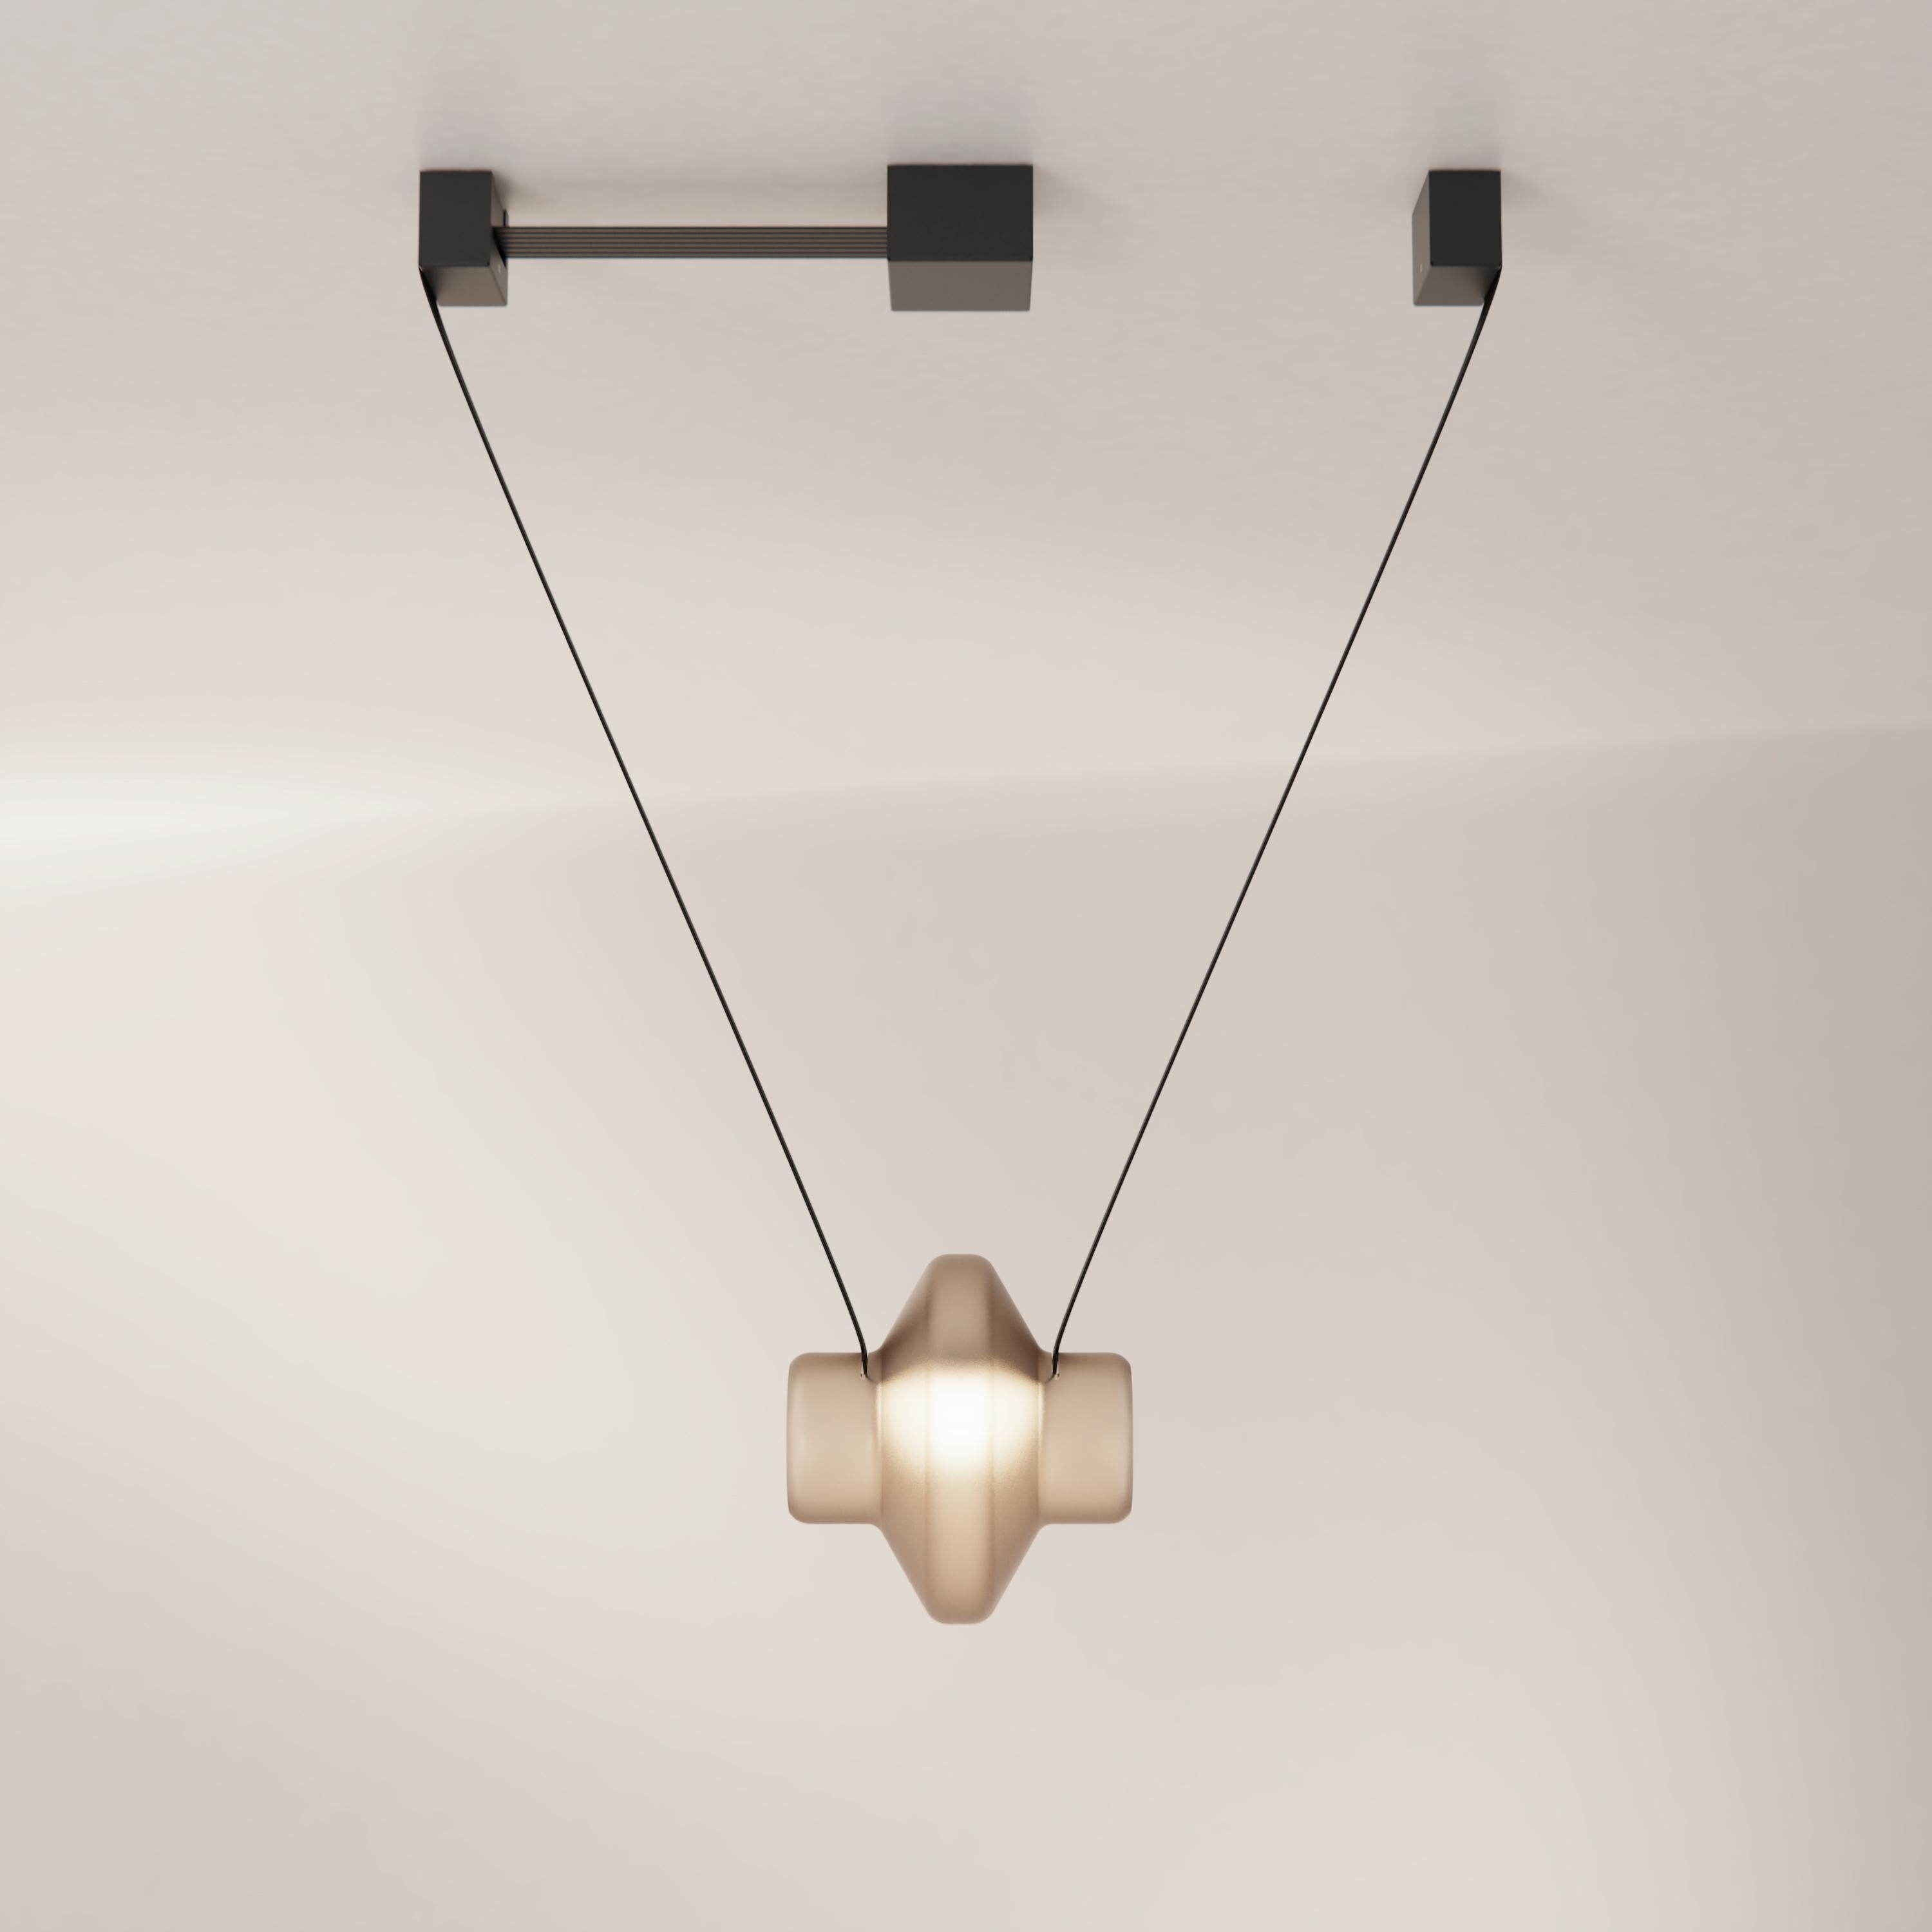 Etat-des-Lieux is a contemporary lighting system with an adaptive silhouette. The 1C configuration is a single pendant that can also be added to other modules to create a unique luminaire.

Etat-des-Lieux, a contemporary lighting system defined by